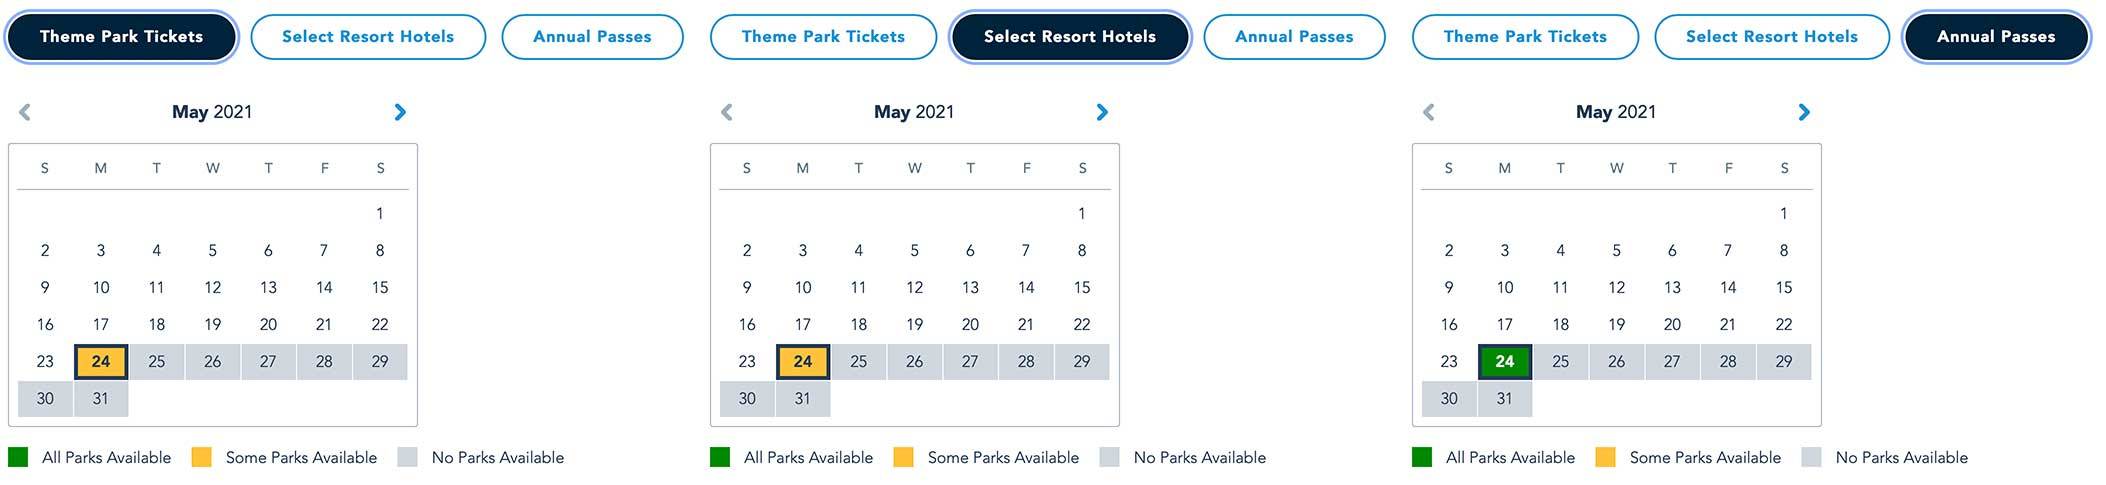 Disney Park Pass now unavailable for all ticket types for the remainder of May 2021 at Disney World